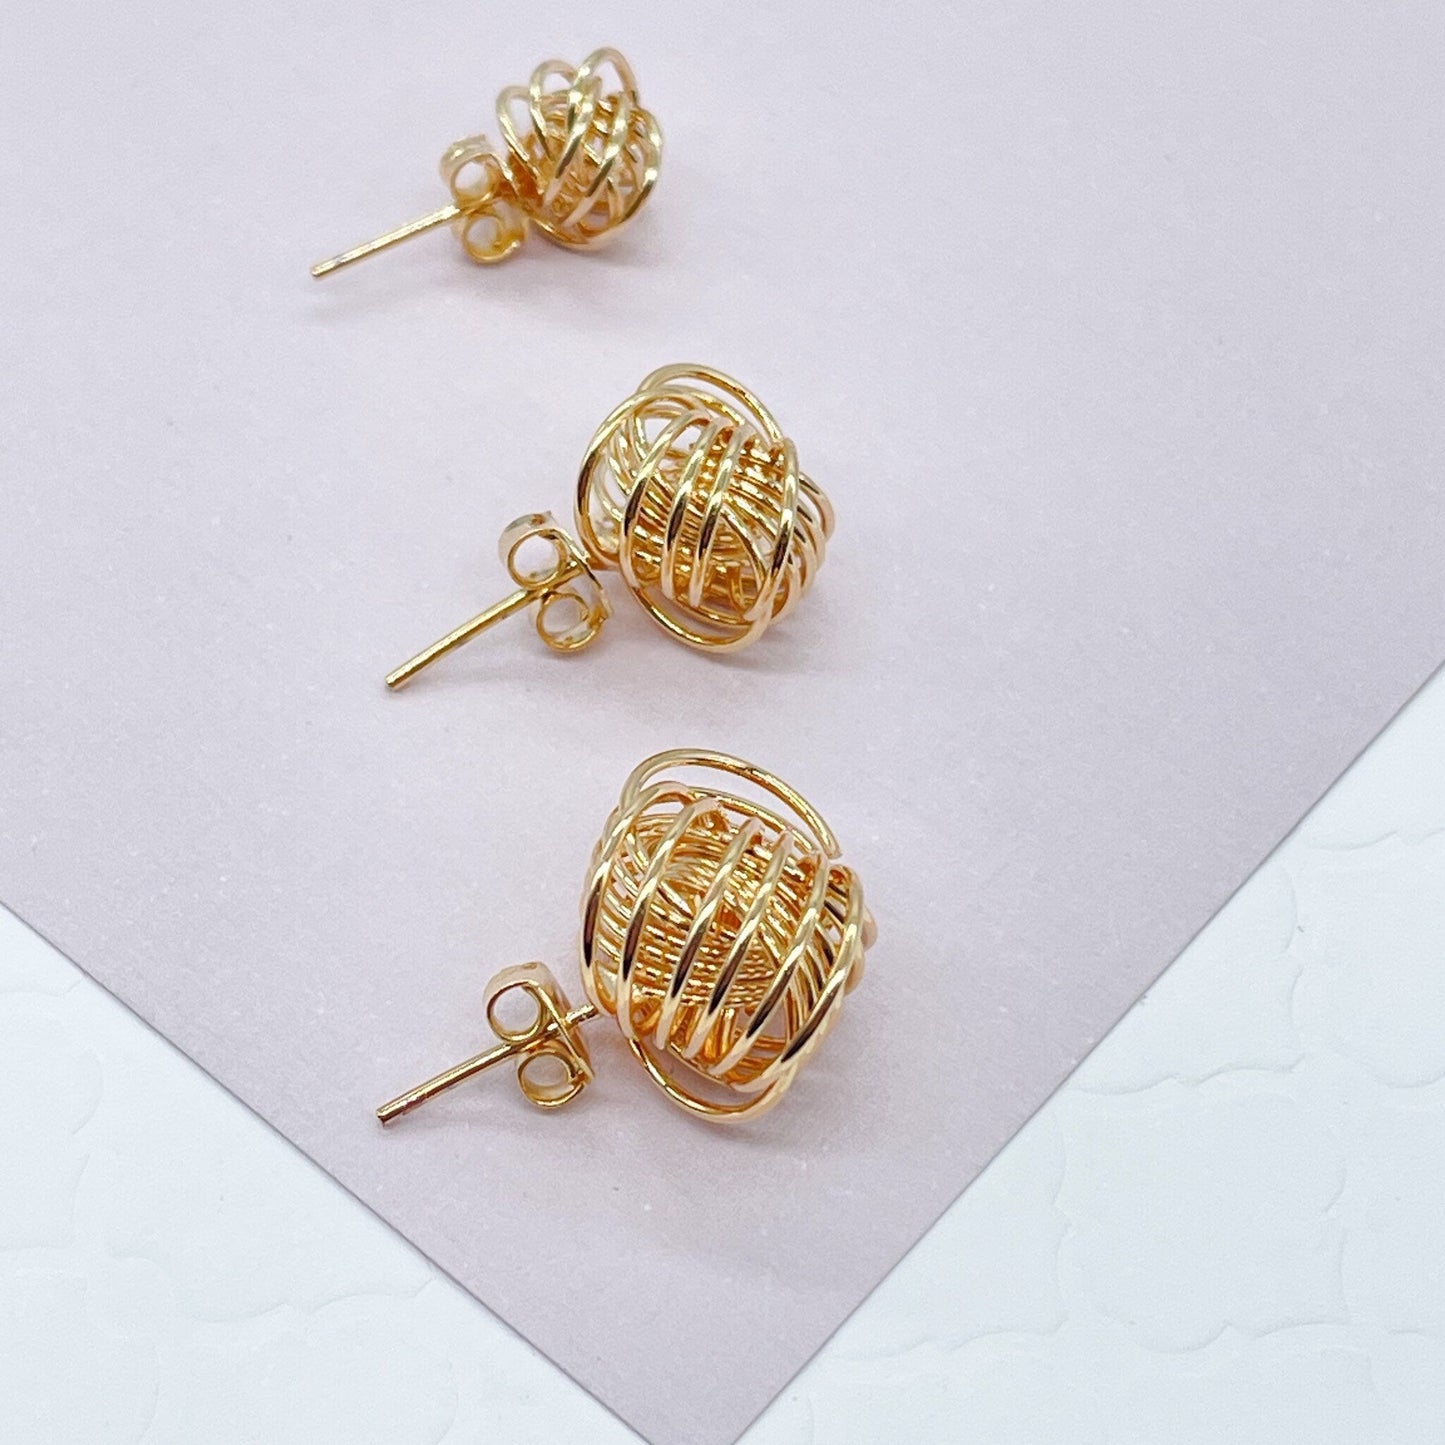 18k Gold Layered Love Knot Stud Earrings, Knot Earrings In Gold Thread, Sizes